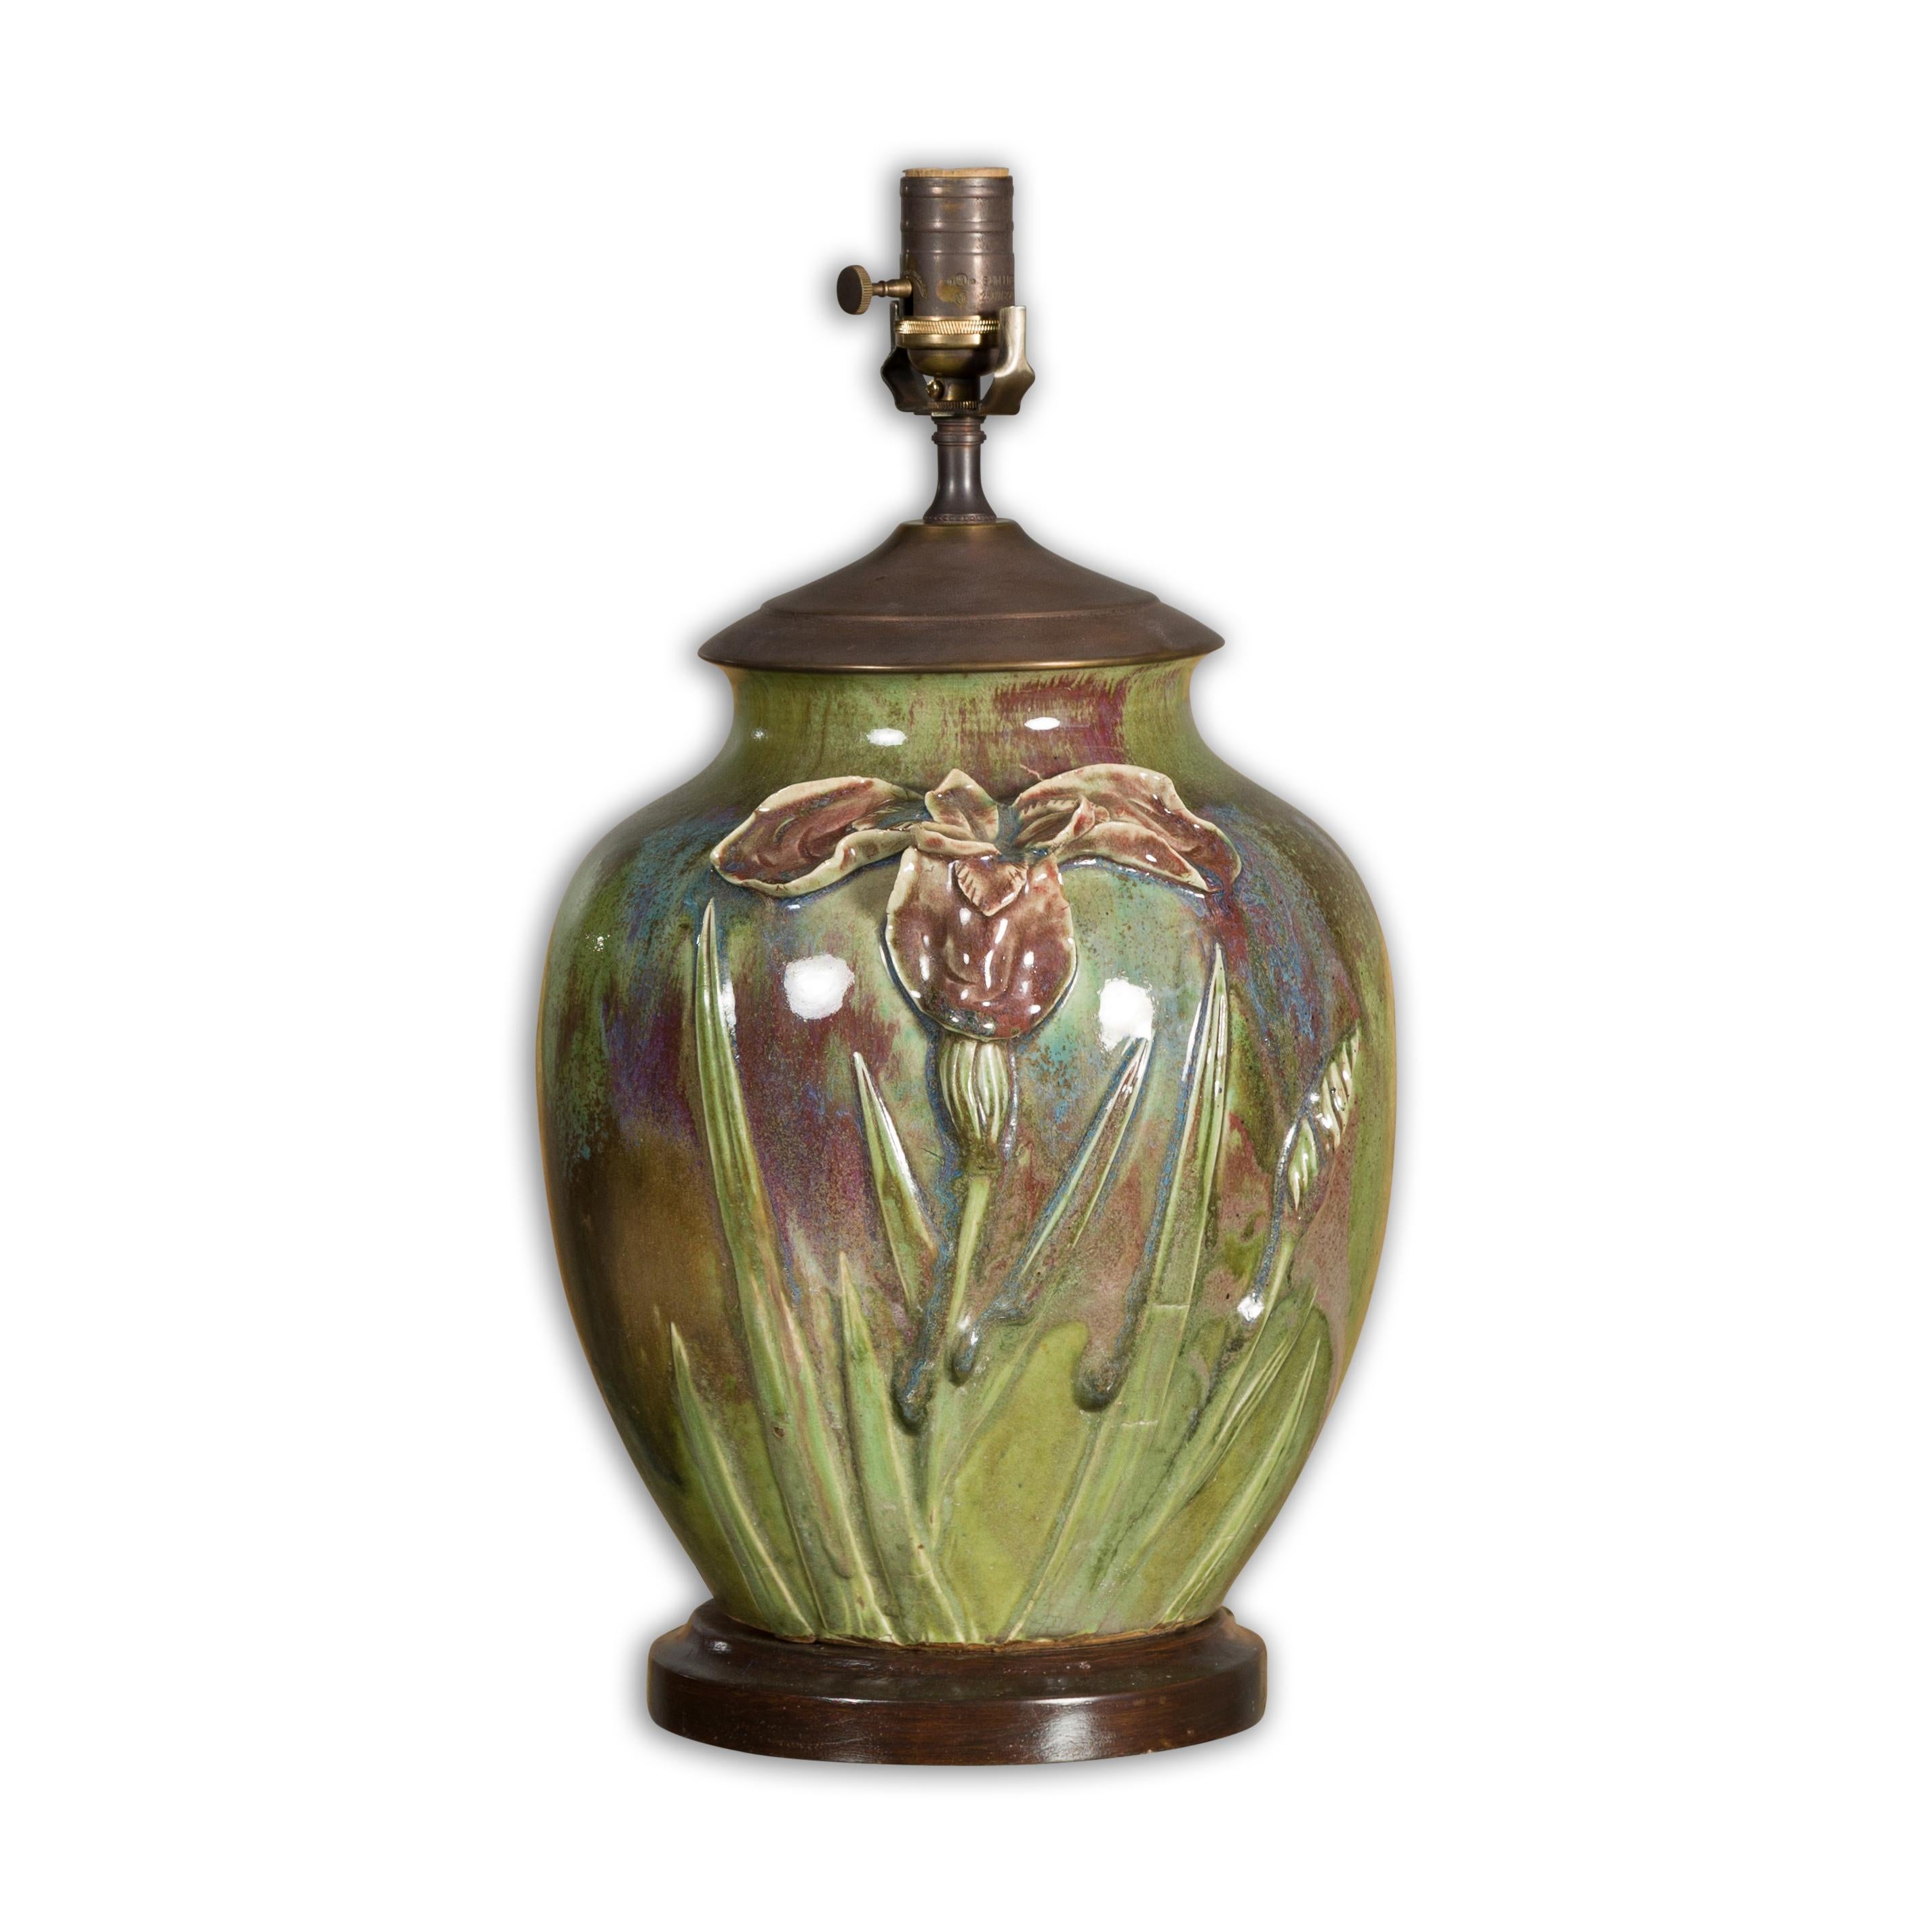 A green glazed 1920s pottery table lamp with raised floral motif, brown accents and circular wooden base. Evoke a sense of classic elegance with this exquisitely designed 1920s green glazed pottery table lamp. This meticulously crafted luminary